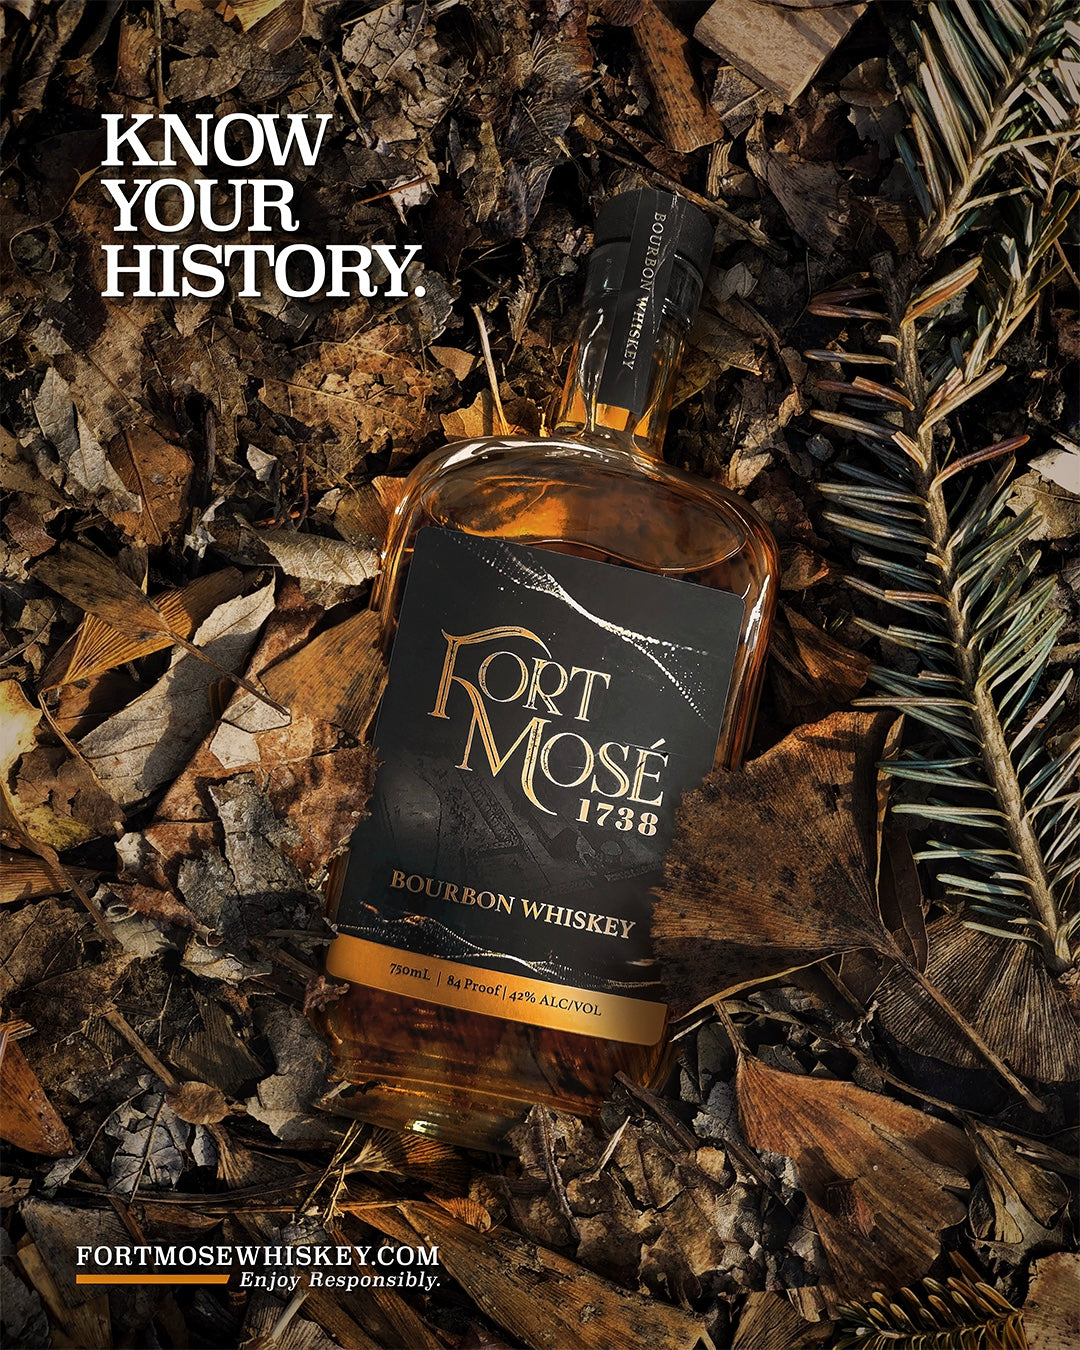 Know Your History Fort Mosé 1738 Bourbon Whiskey laying in leaves named after first city black people could live free in America